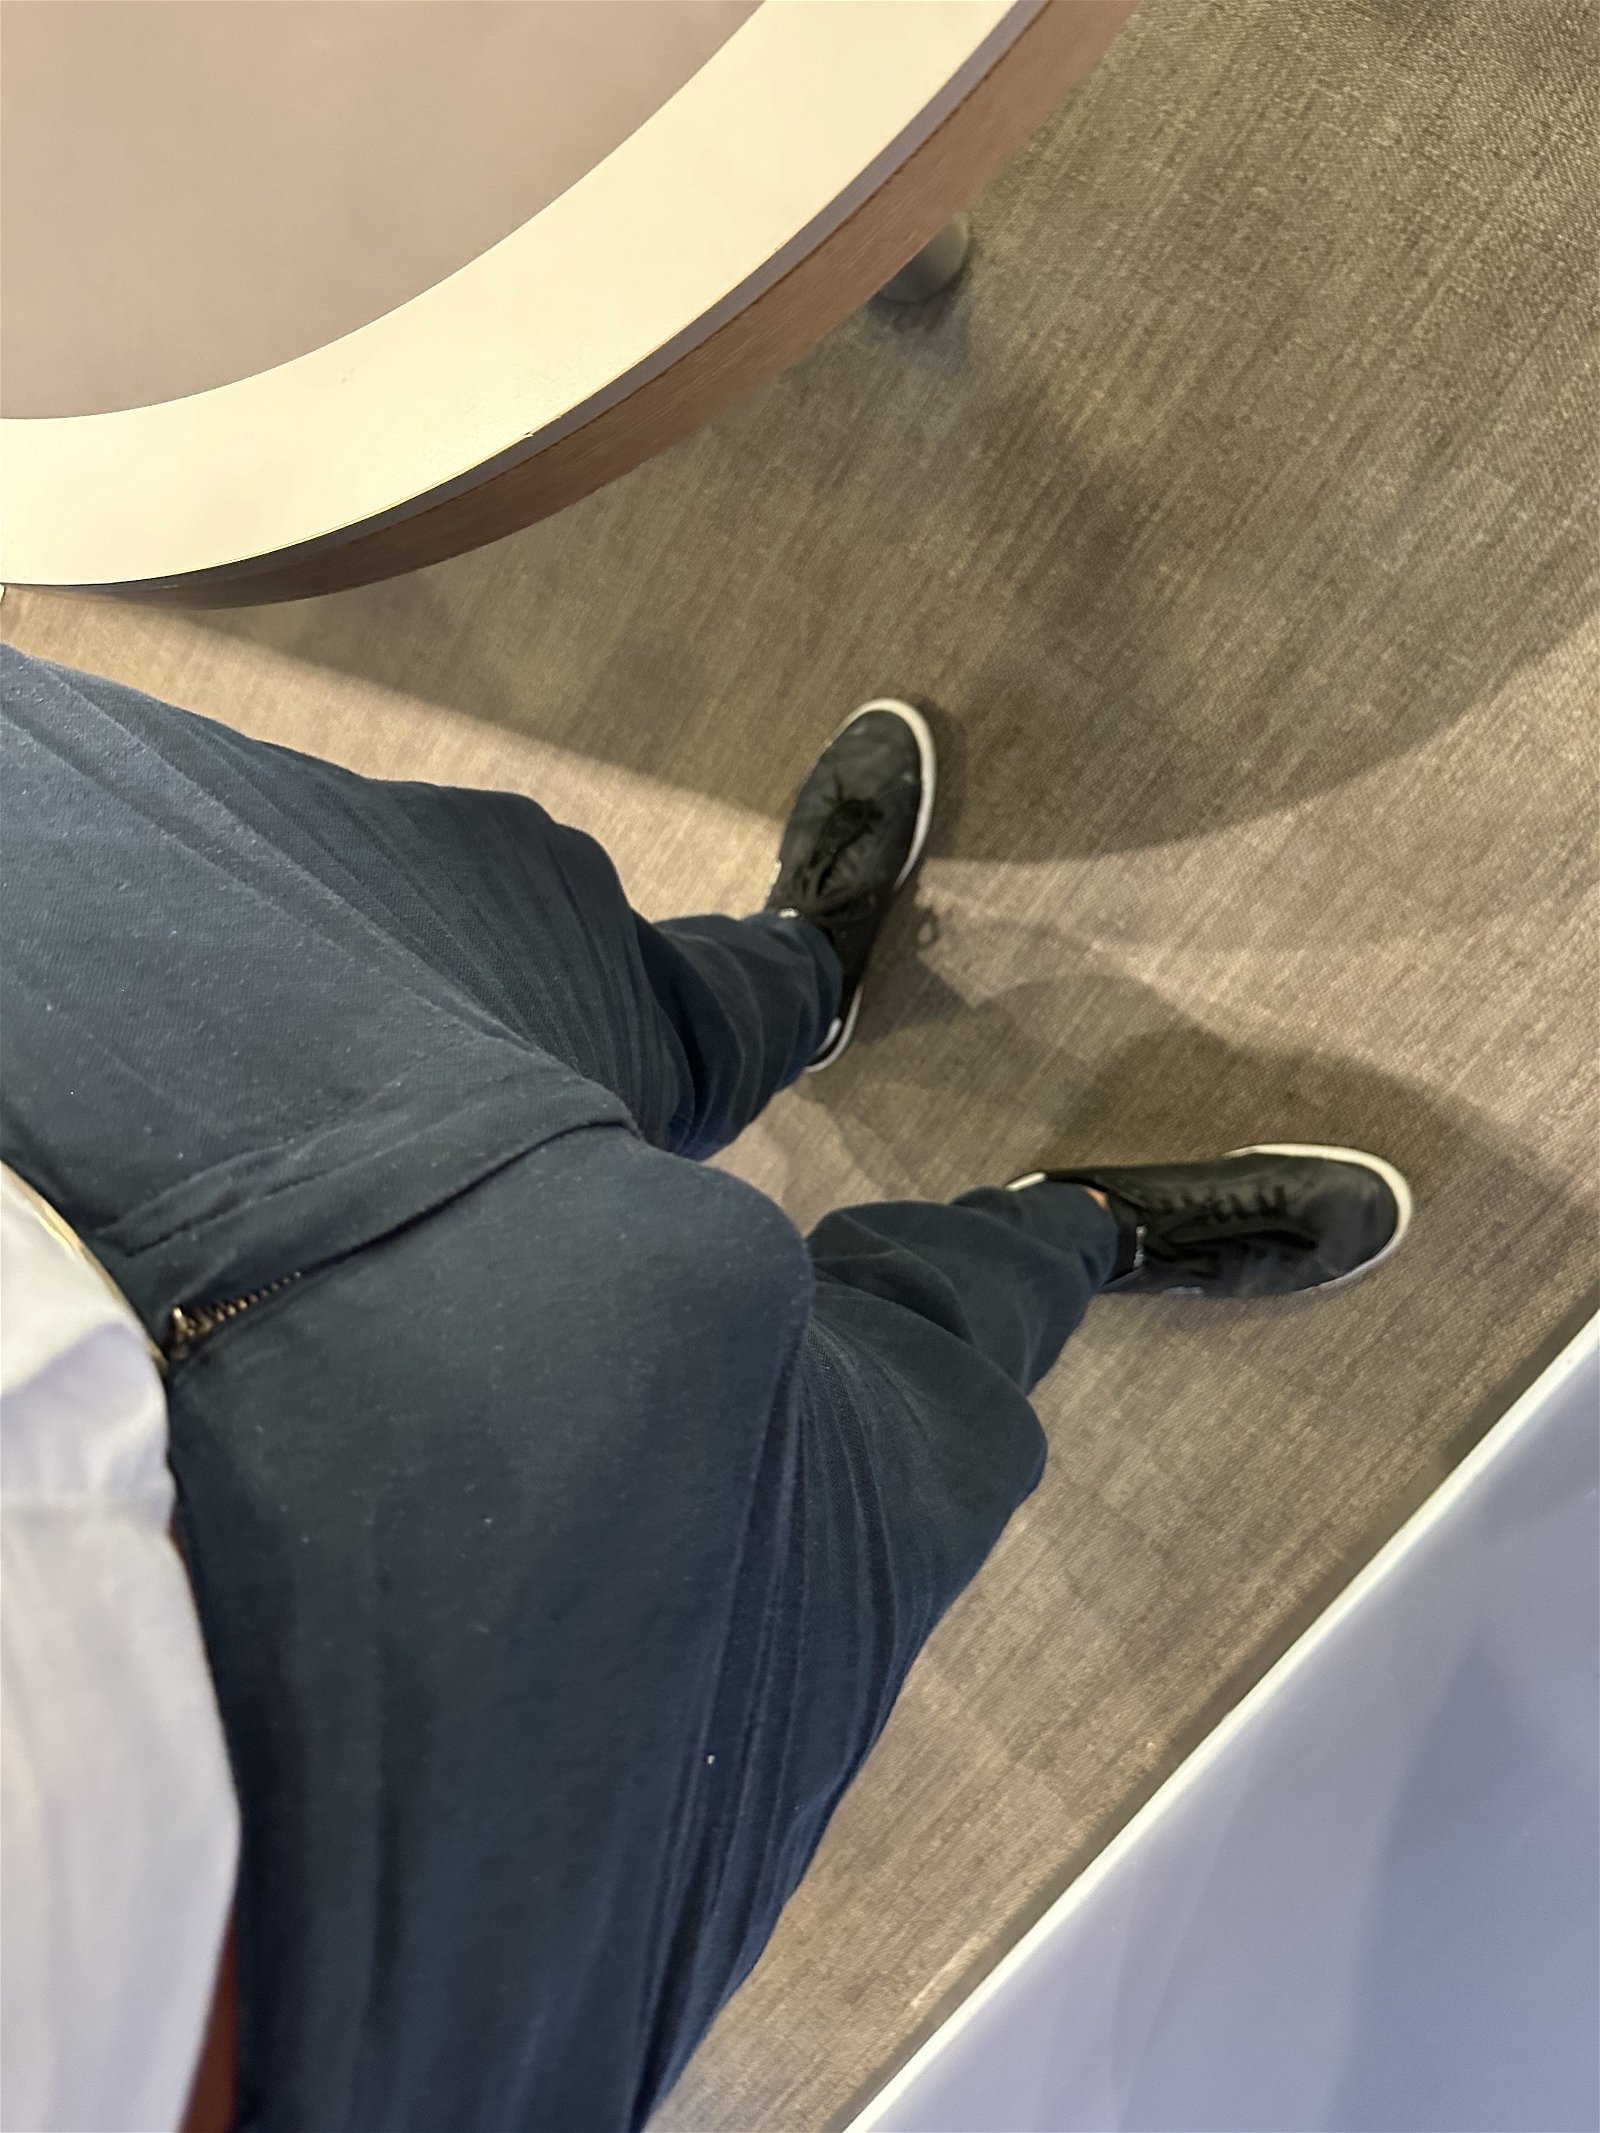 Photo by Gifted18 with the username @Gifted18,  October 28, 2022 at 5:48 AM. The post is about the topic GIfted18's dick and the text says 'Normal day at work!'